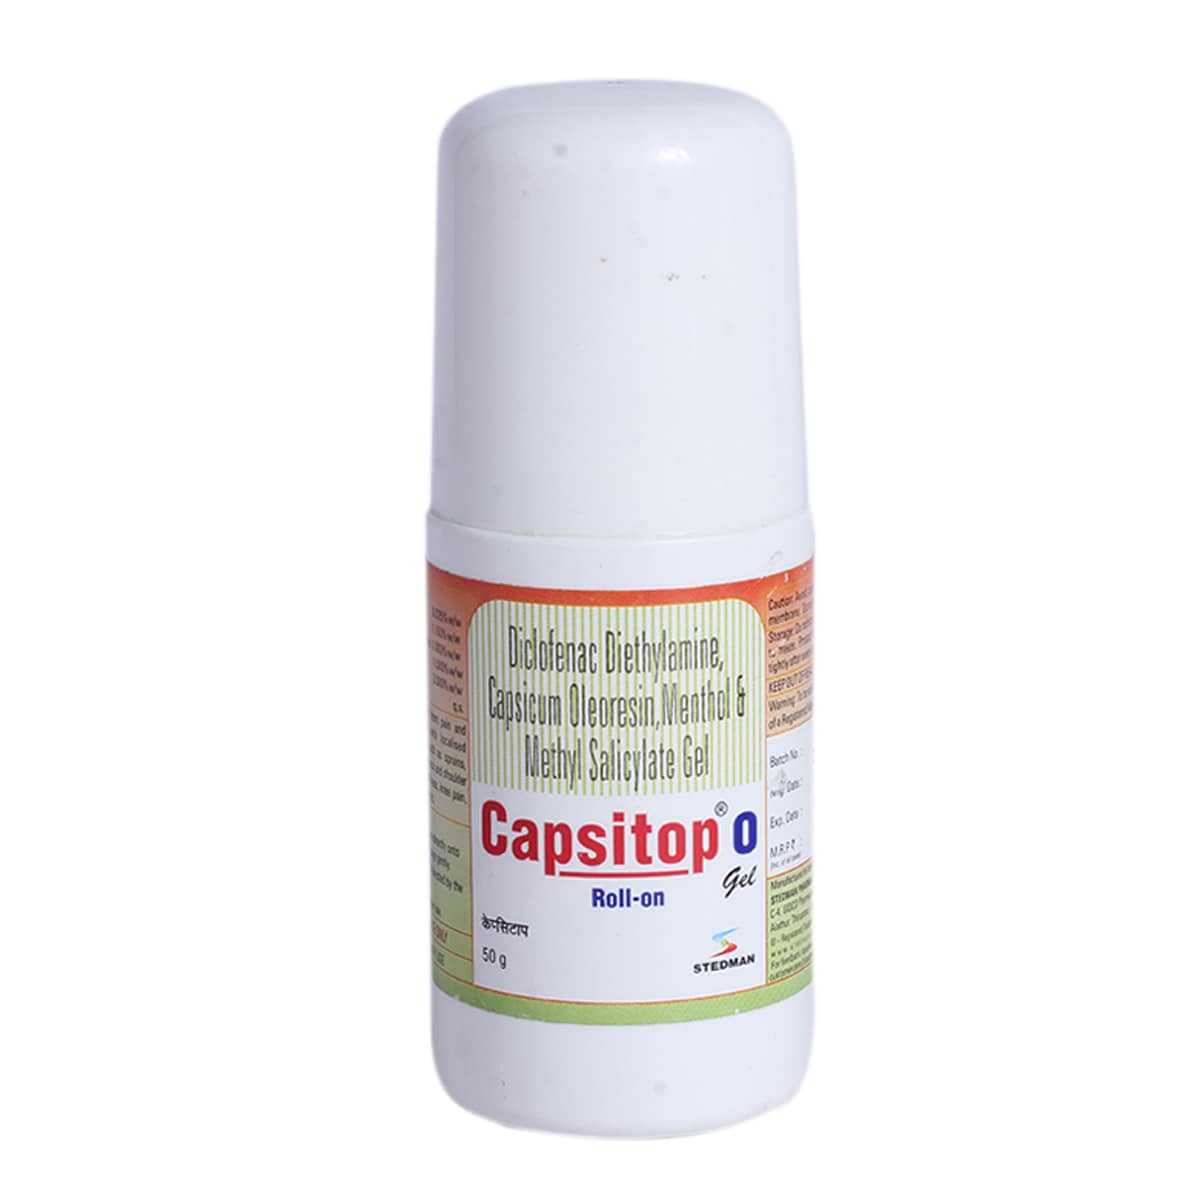 Buy Capsitop O Roll ON 50 gm Online